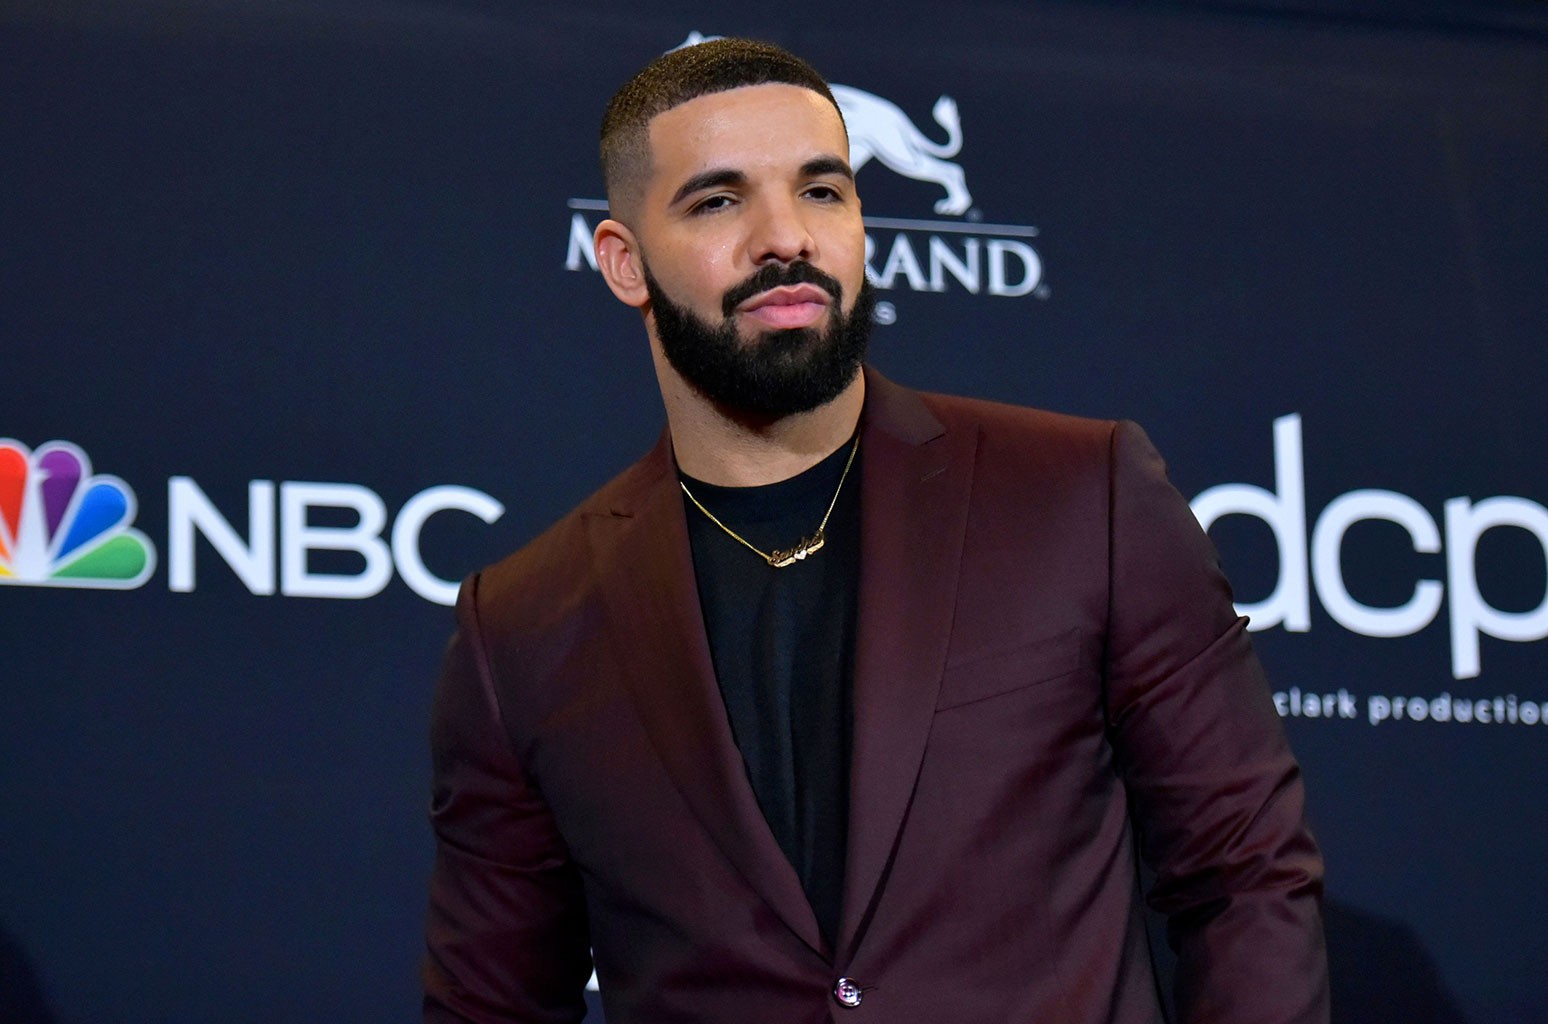 Drake Reveals He Experienced Hair Loss After Contracting COVID